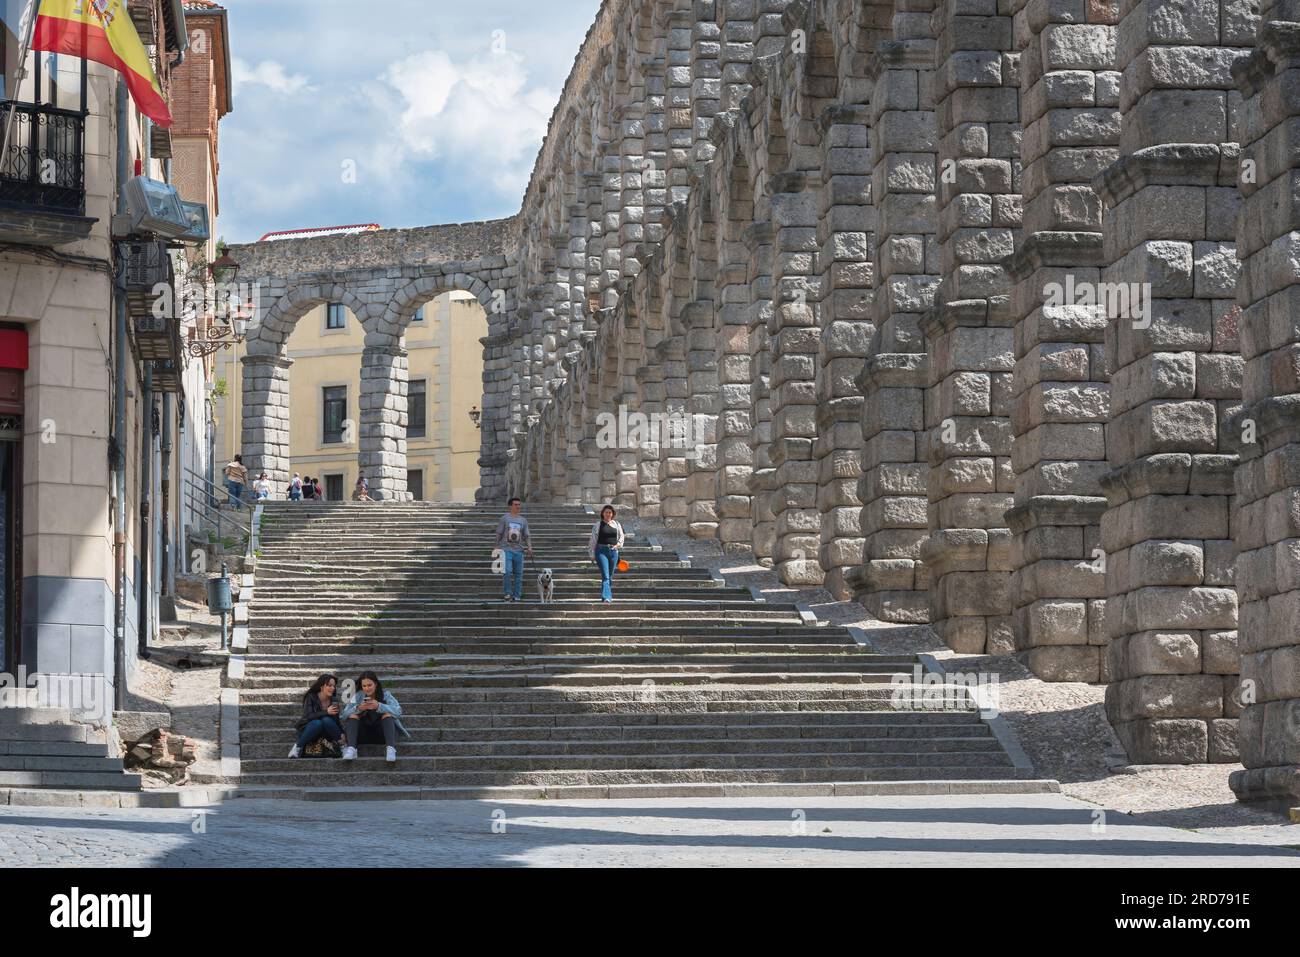 Segovia Spain aqueduct, view in summer of the grand stairway sited along the east side of the magnificent 1st Century AD Roman aqueduct in Segovia. Stock Photo